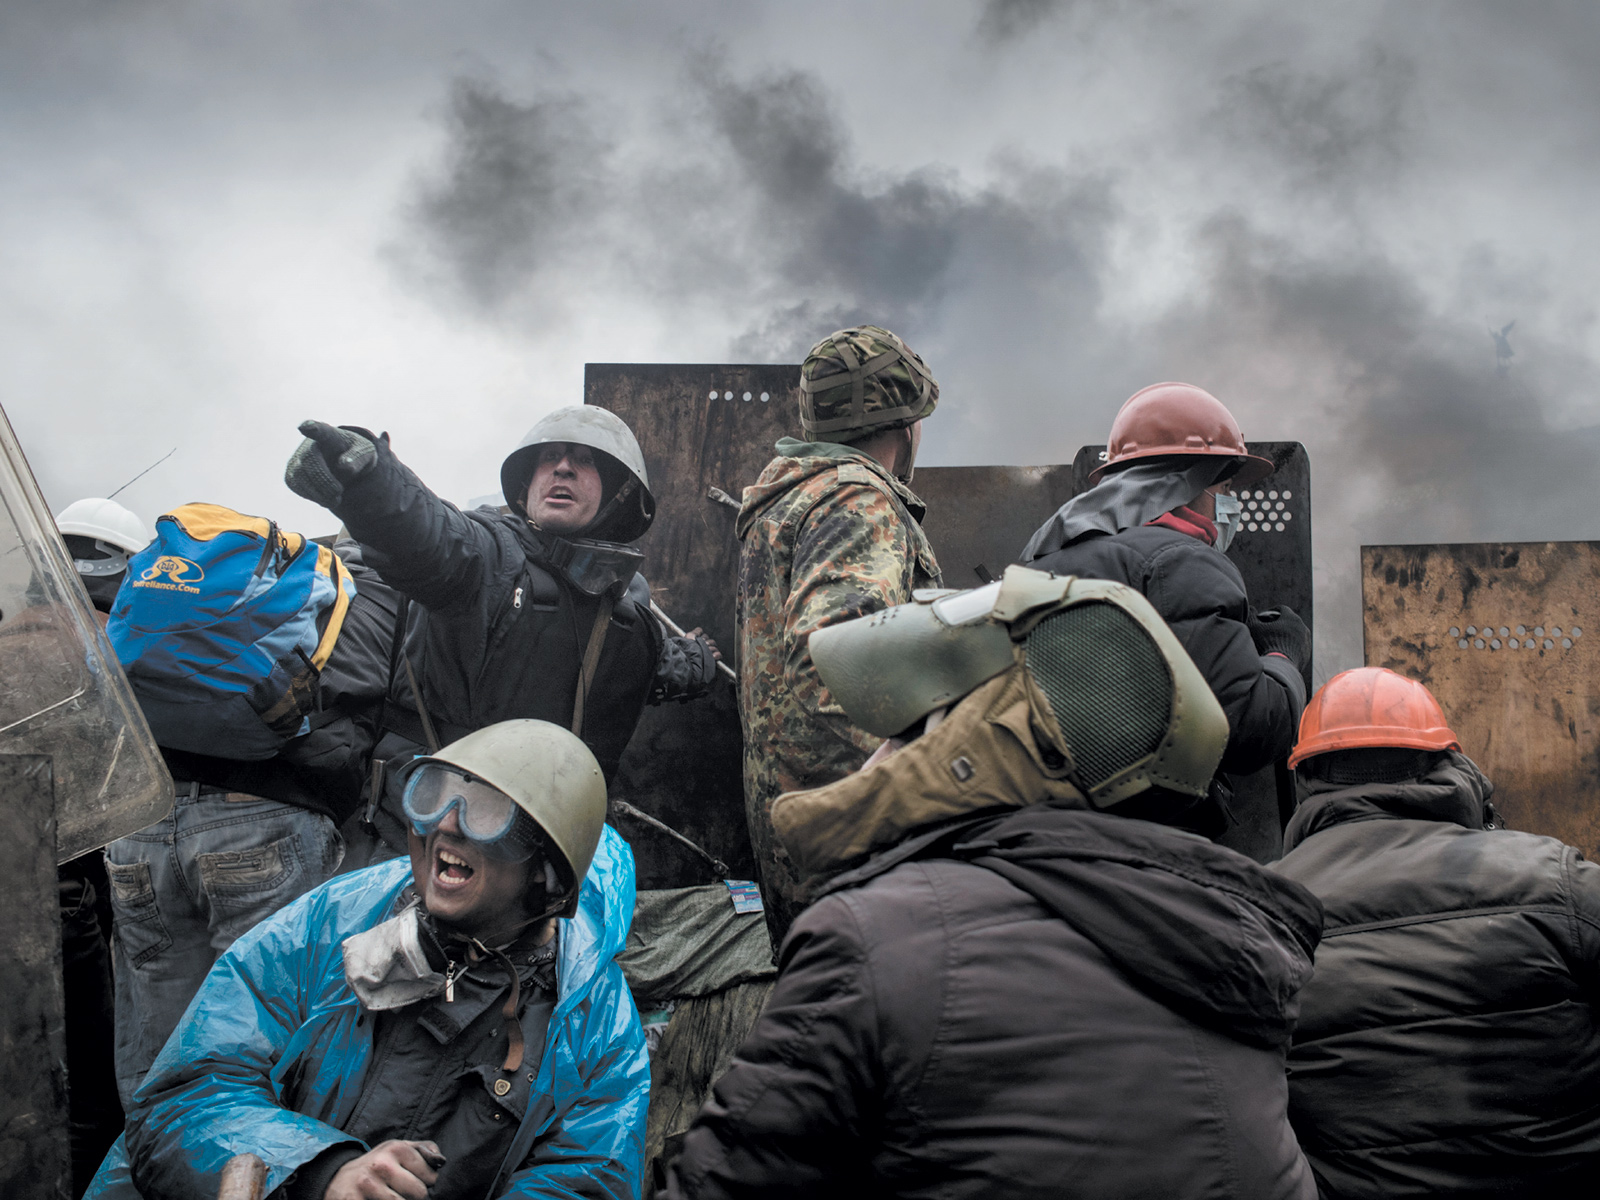 Unarmed anti-government protesters being fired upon by snipers, Maidan Square, Kiev, February 2014